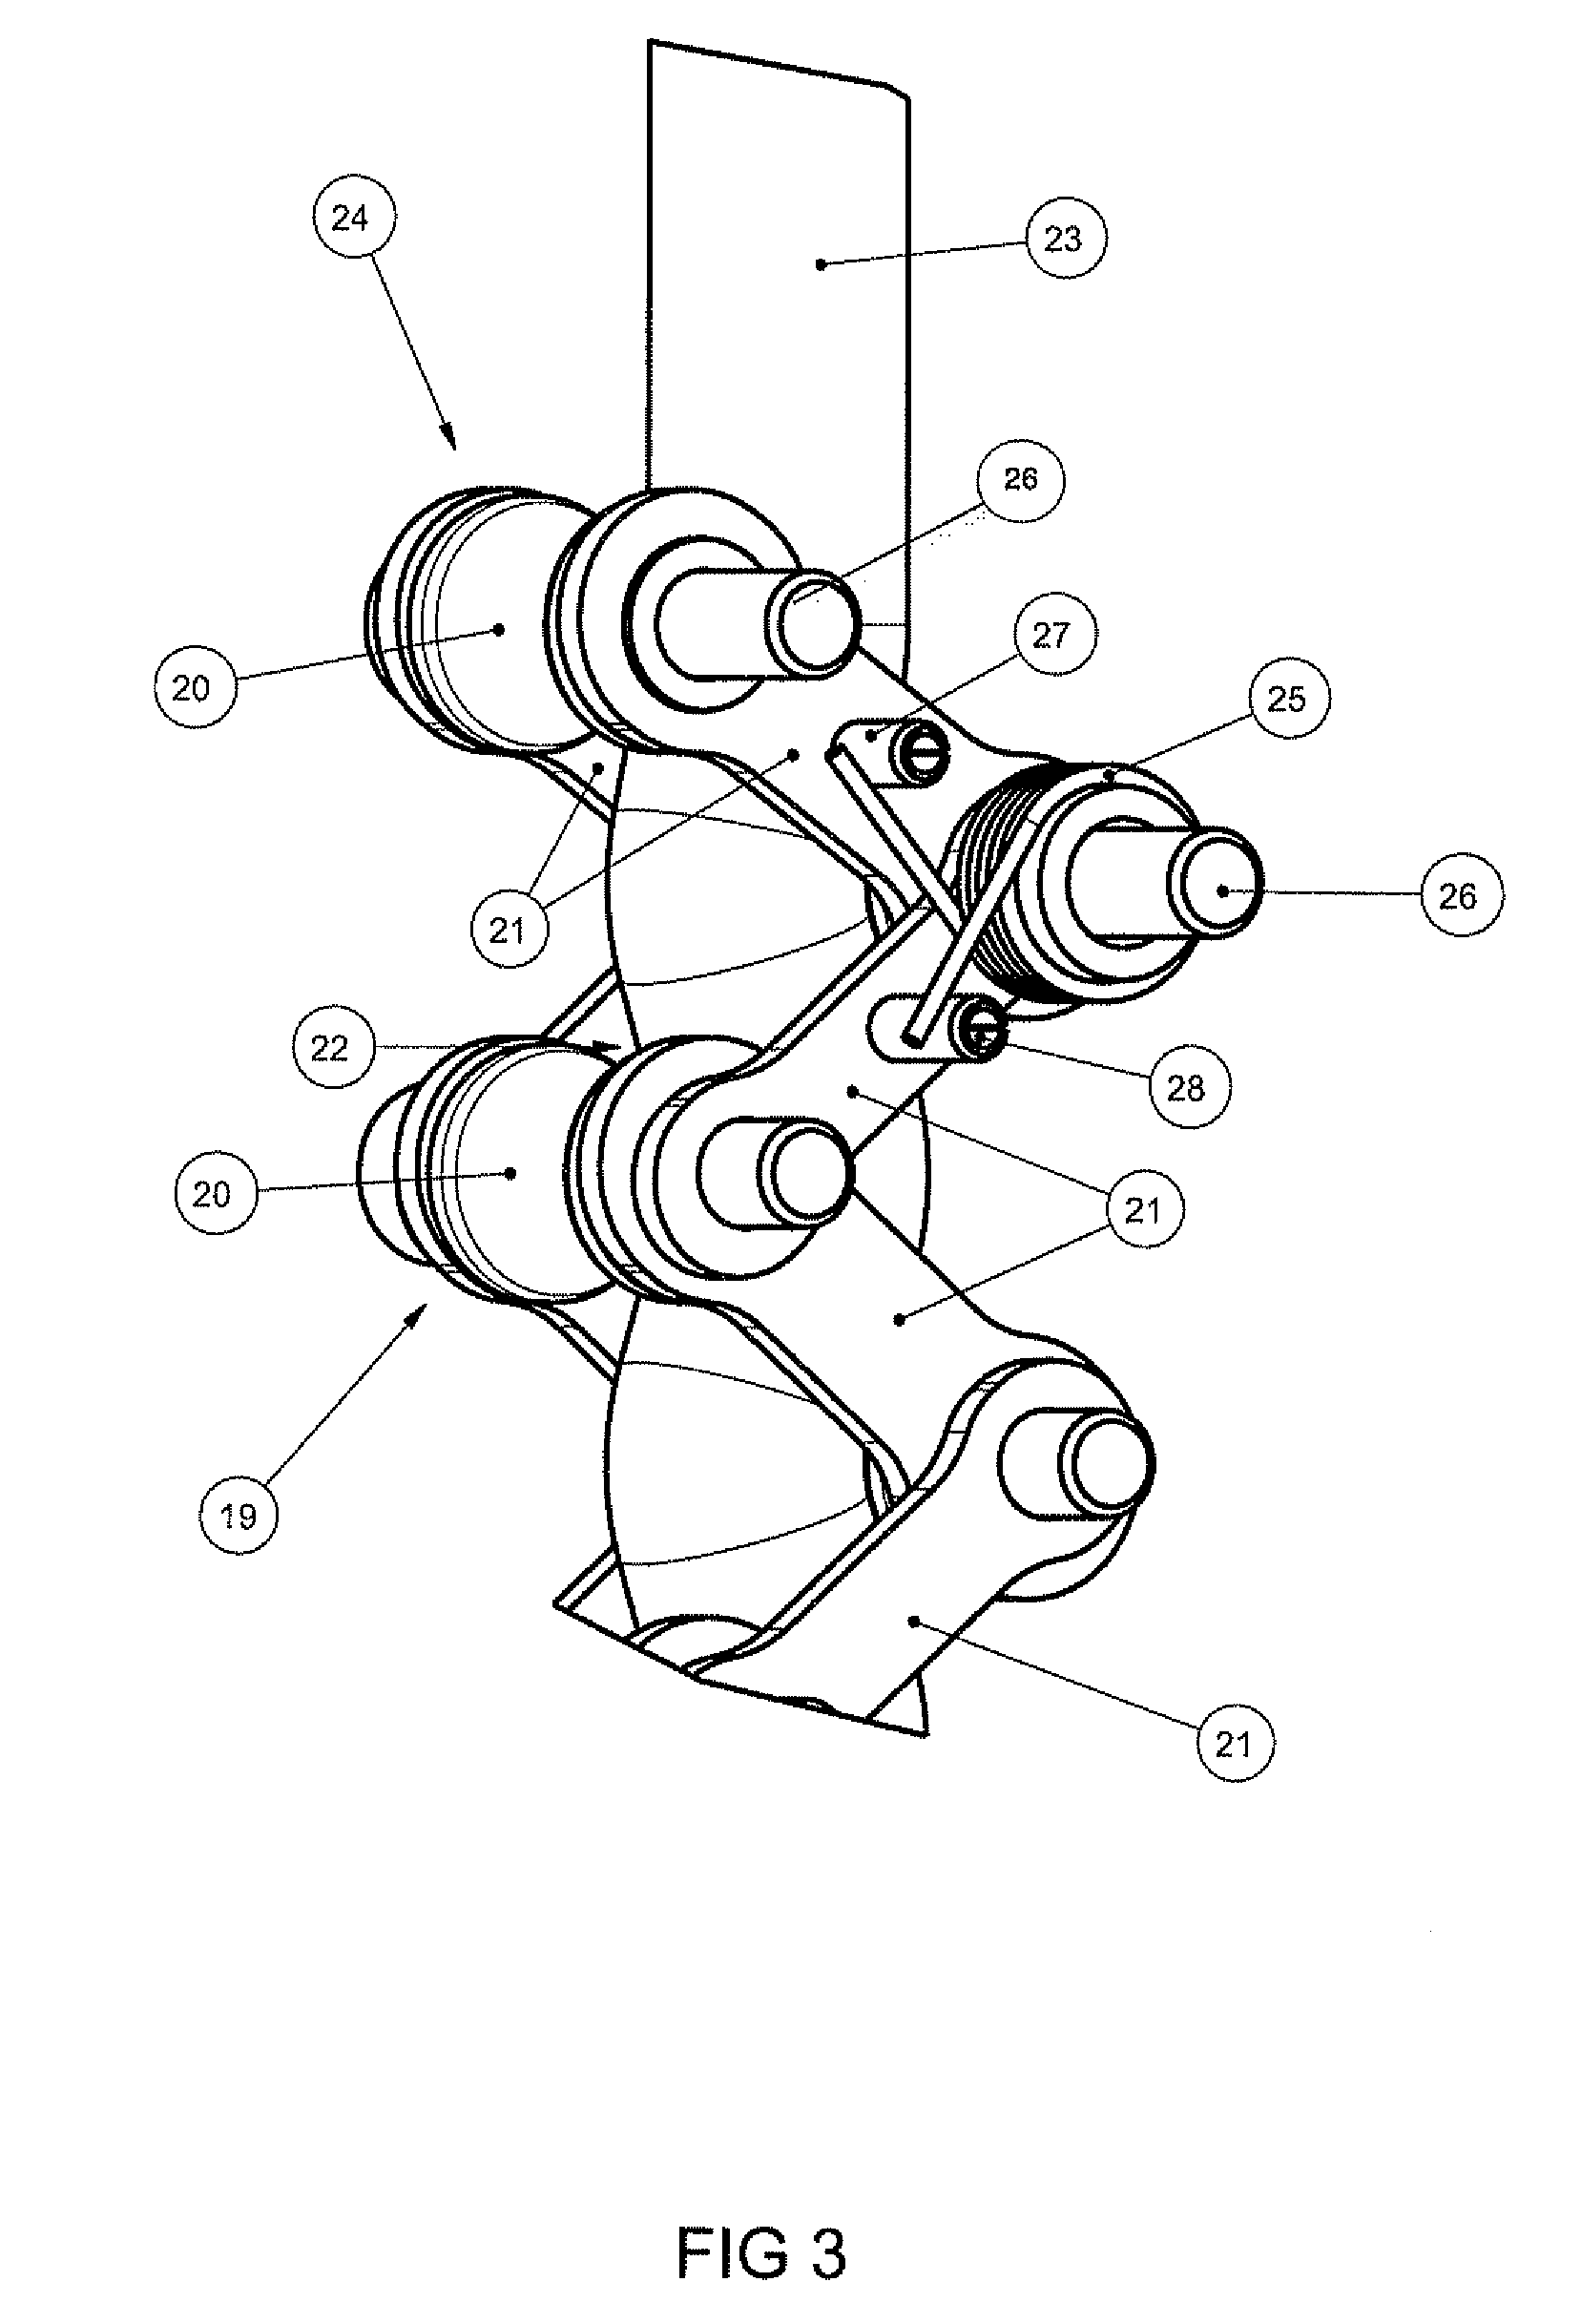 Ascender and descender appliance for climbing and descending on a rope